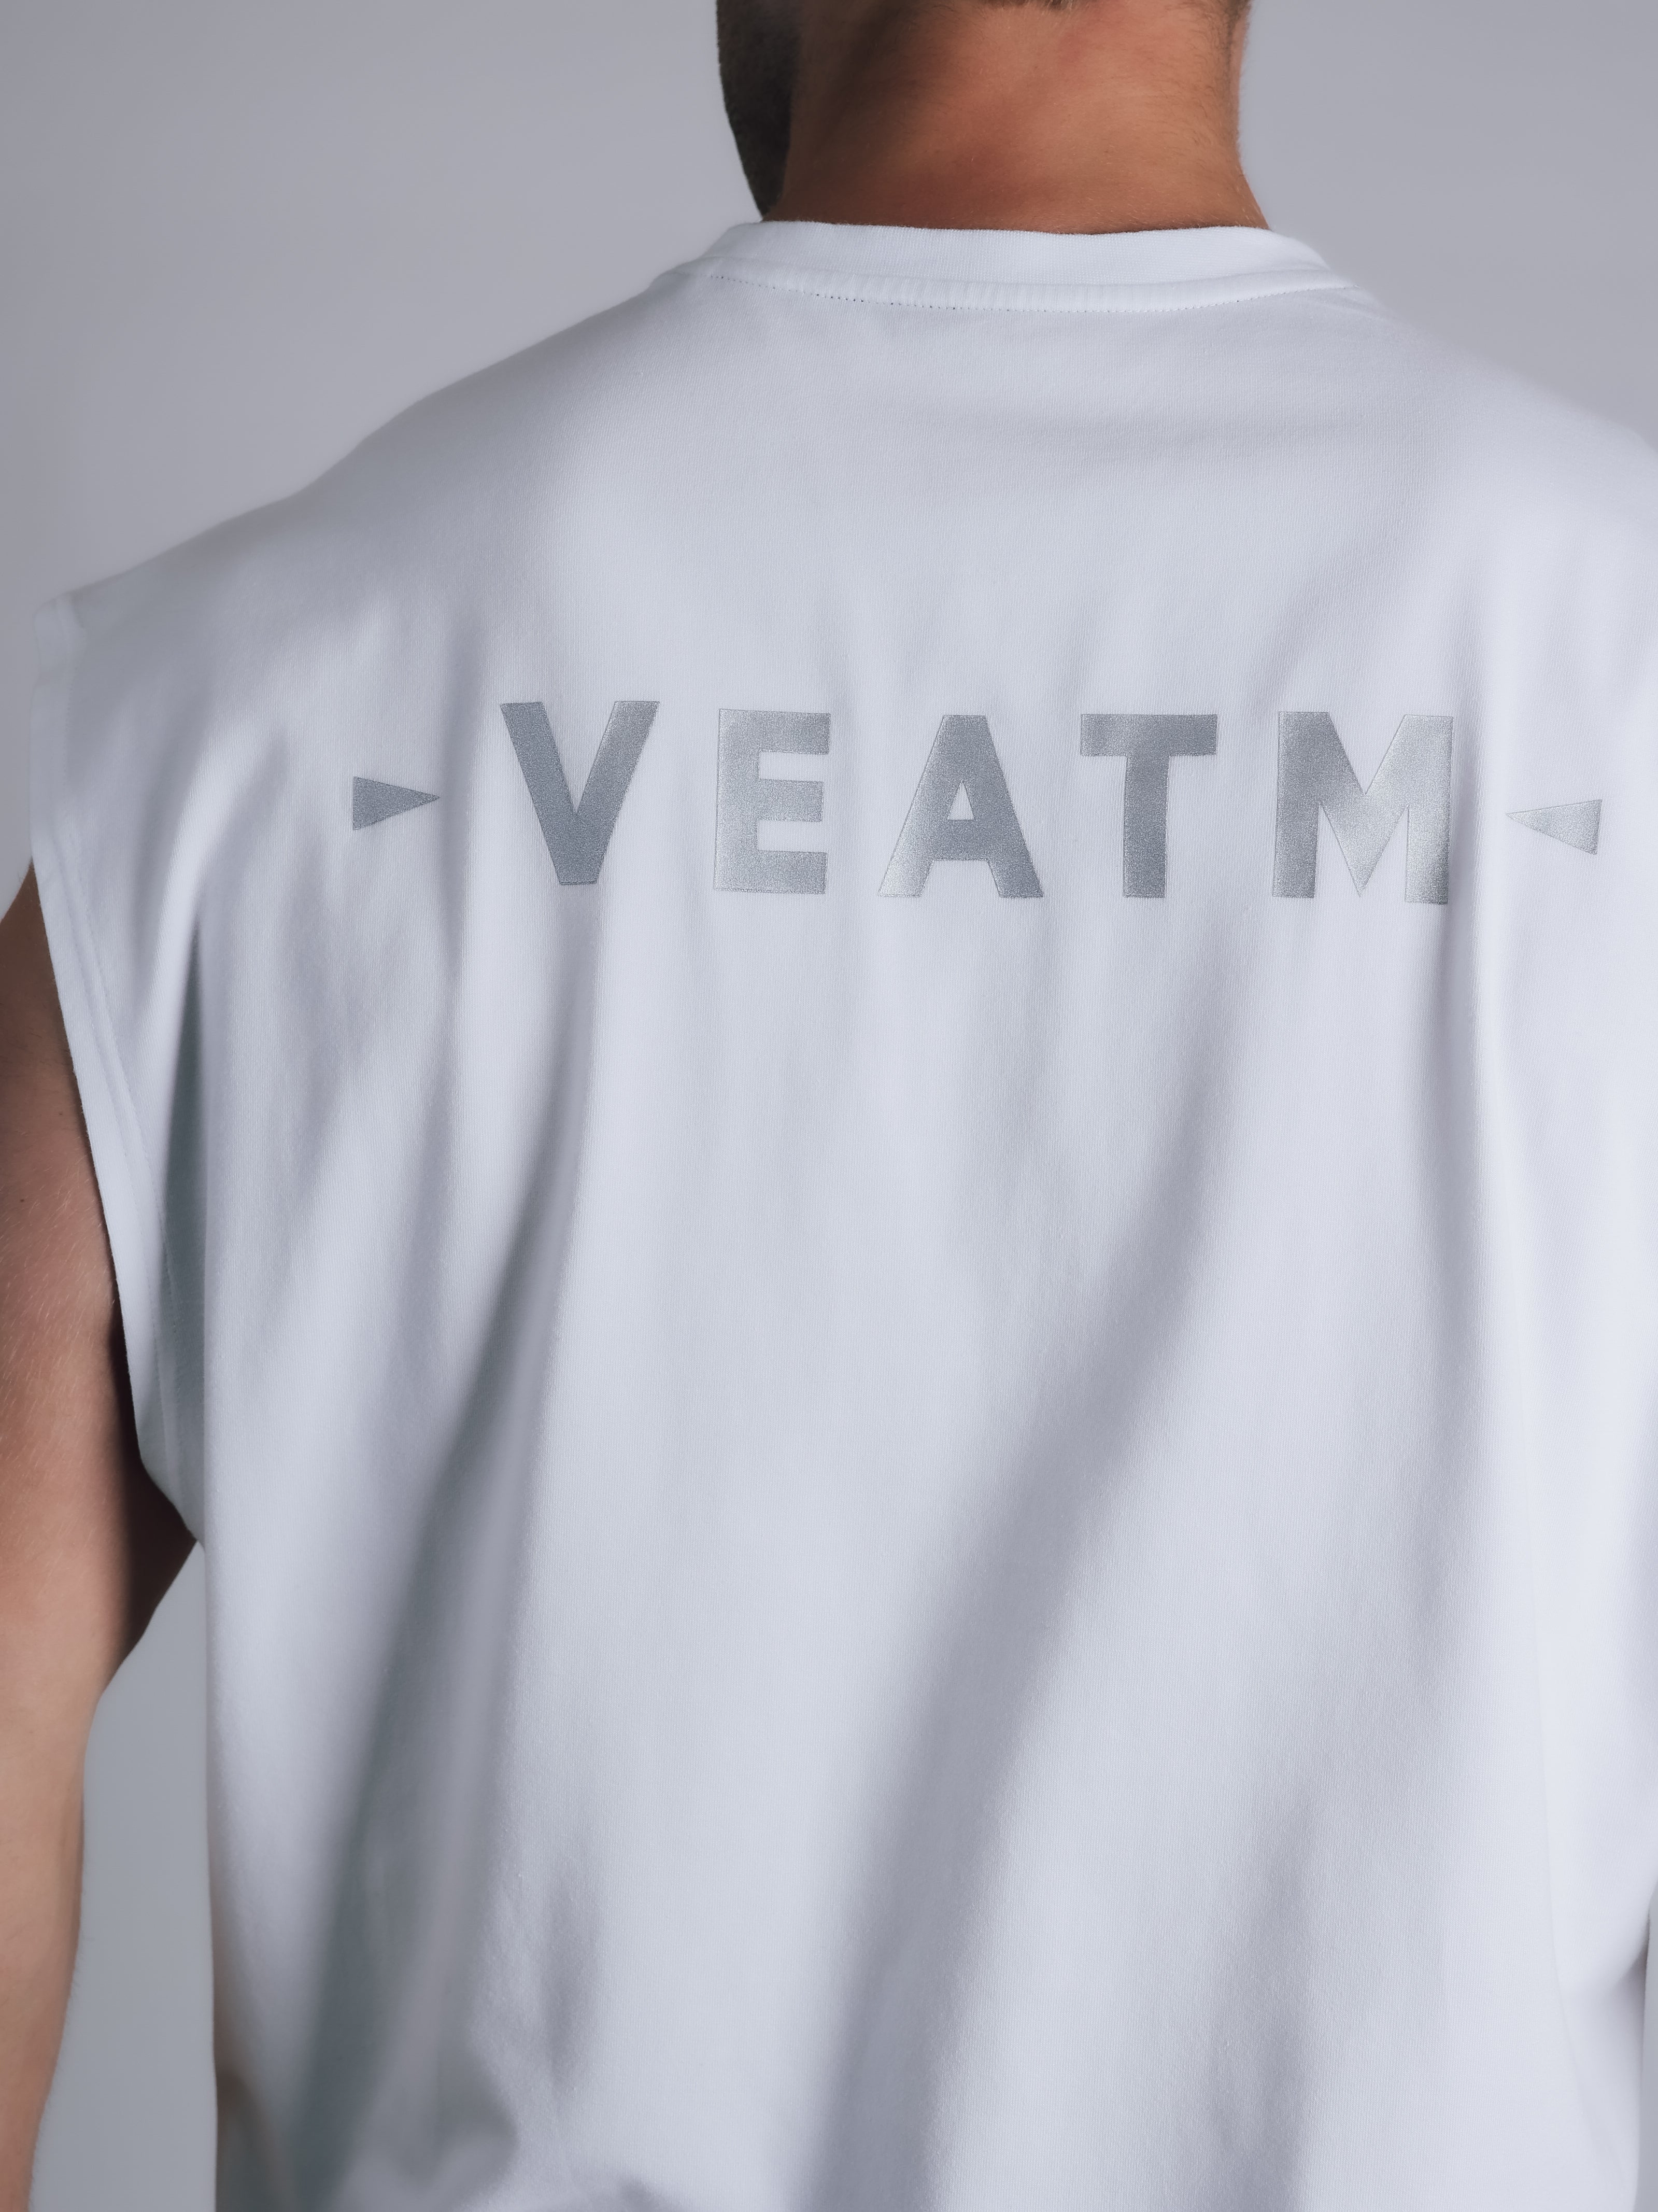 NO SLEEVE TOPS【OFFWHITE】 | VEATM 公式ショッピングサイト